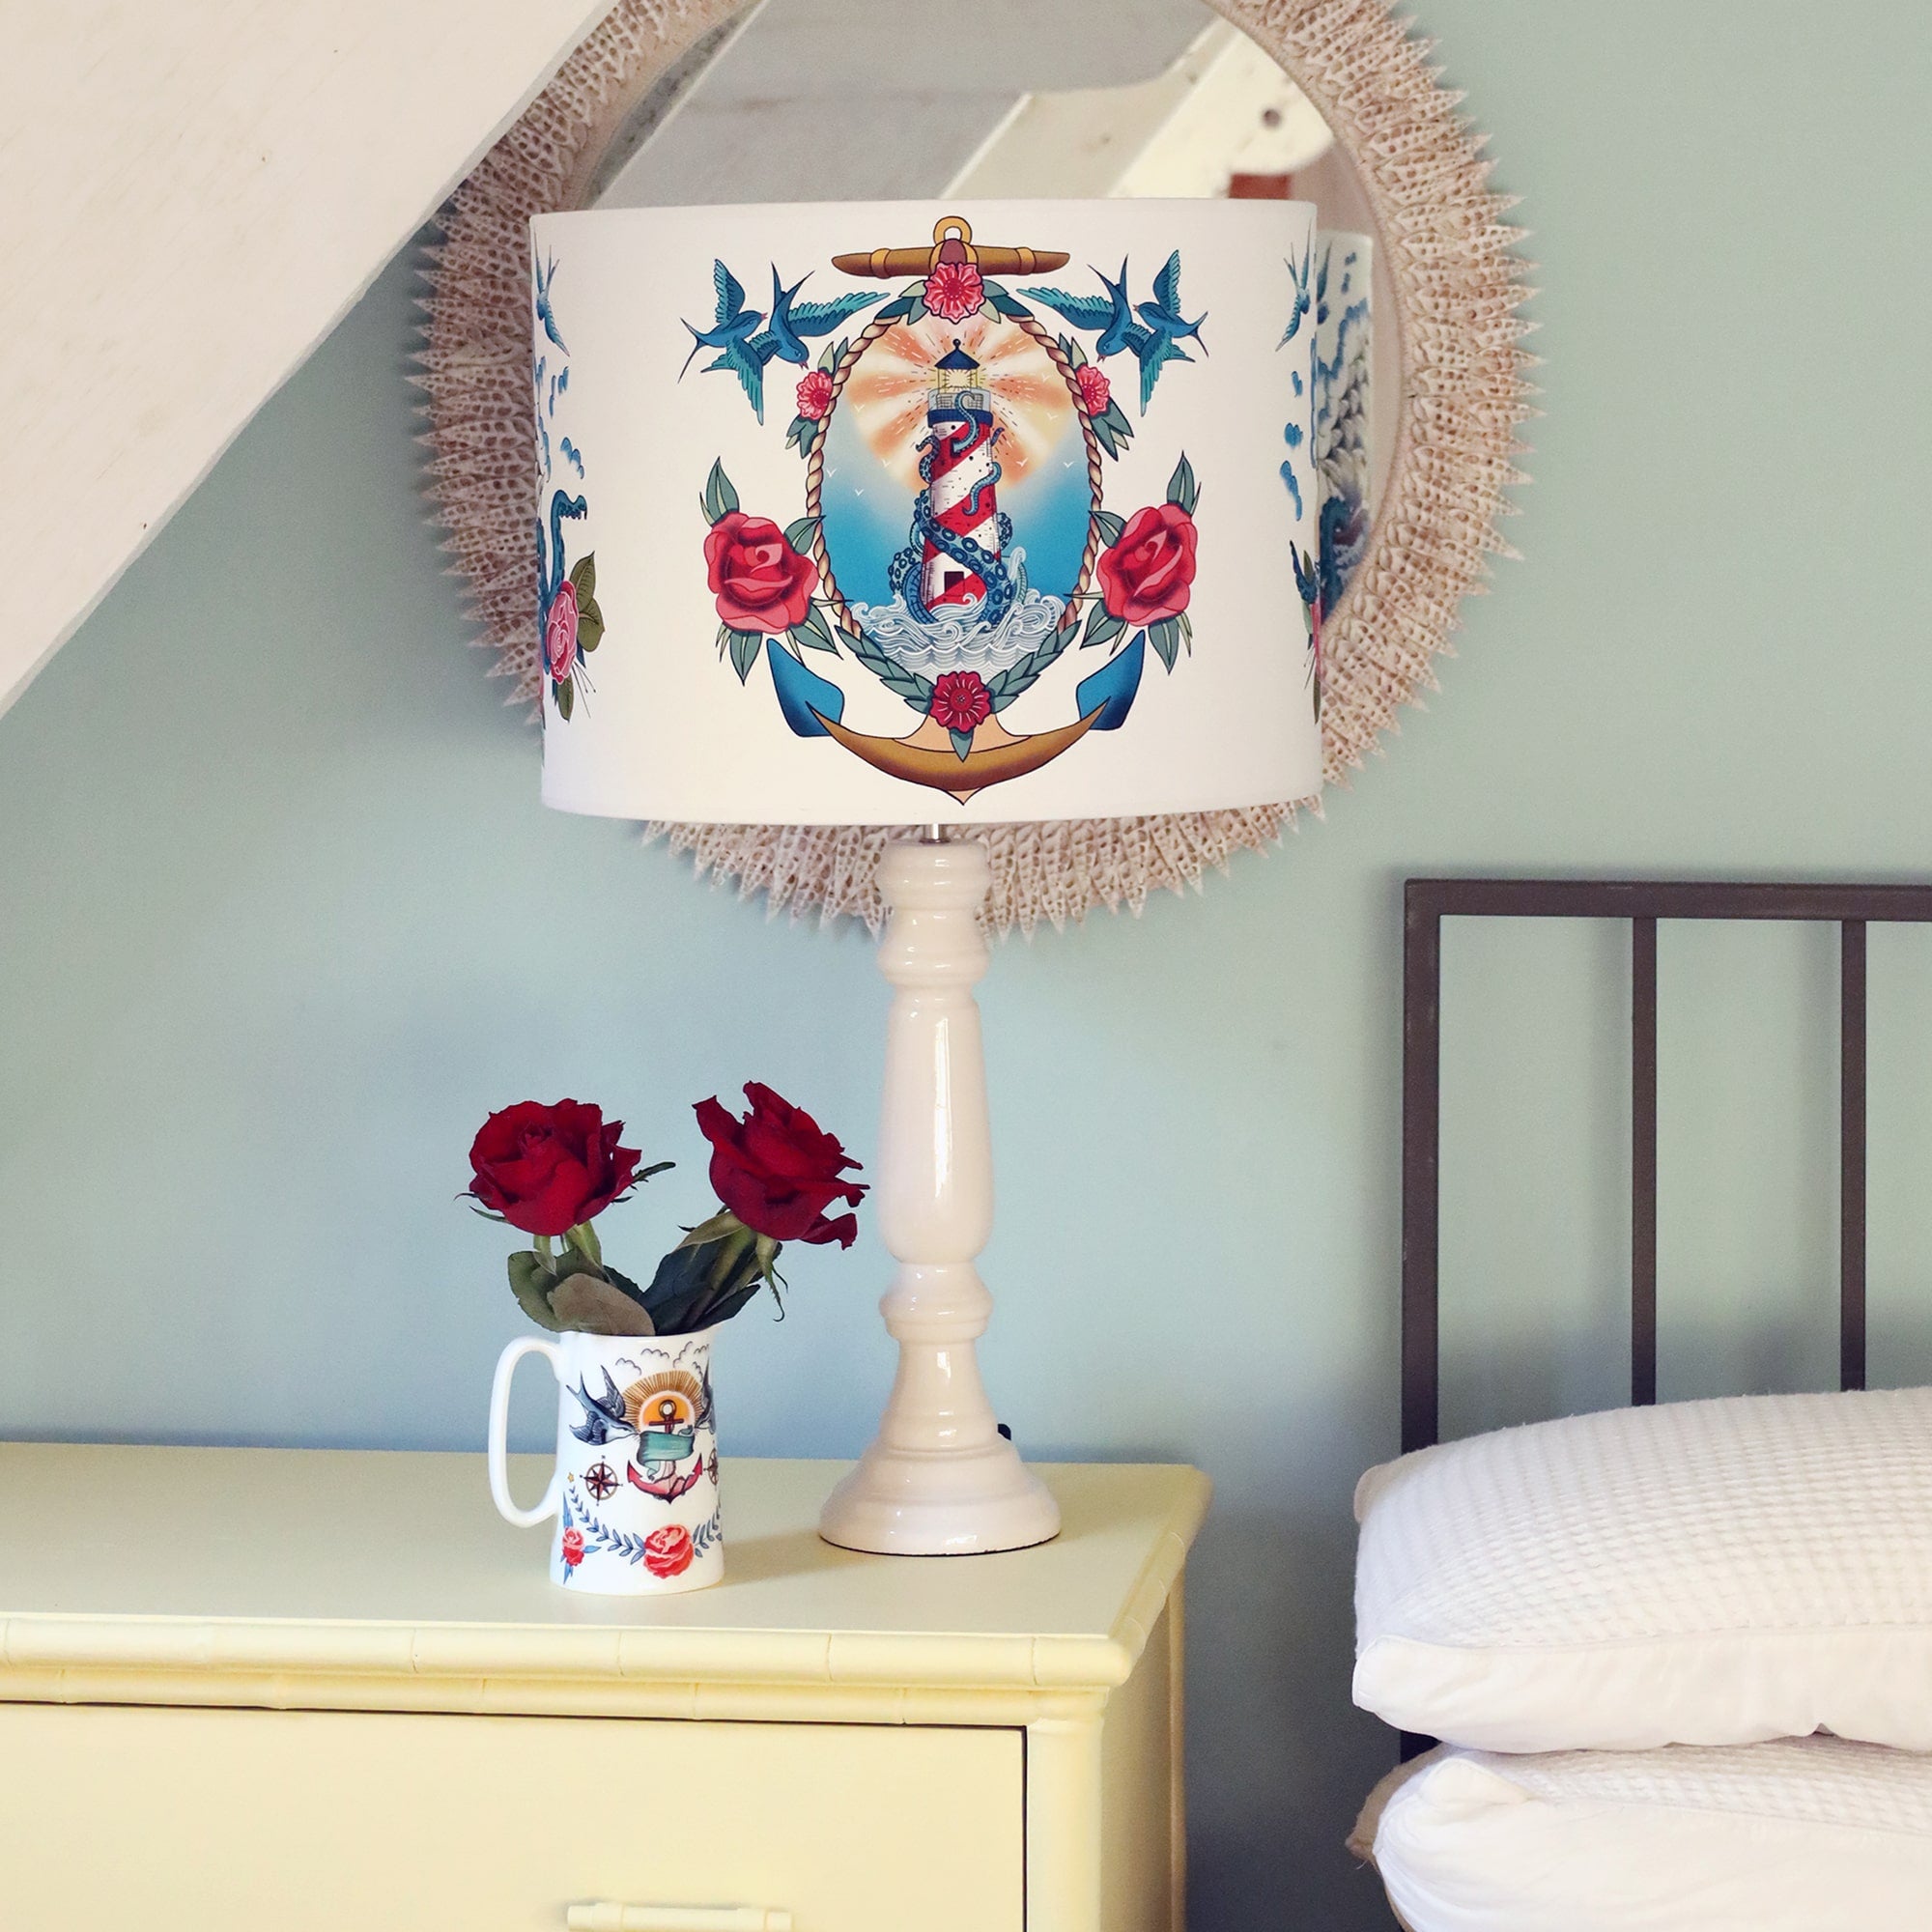 Soft yellow chest of drawers next to a bed with a glossy white lamp base and lighthouse & kraken tattoo inspired design. There is a small jug with swallows and anchor design with red roses next to the lamp.